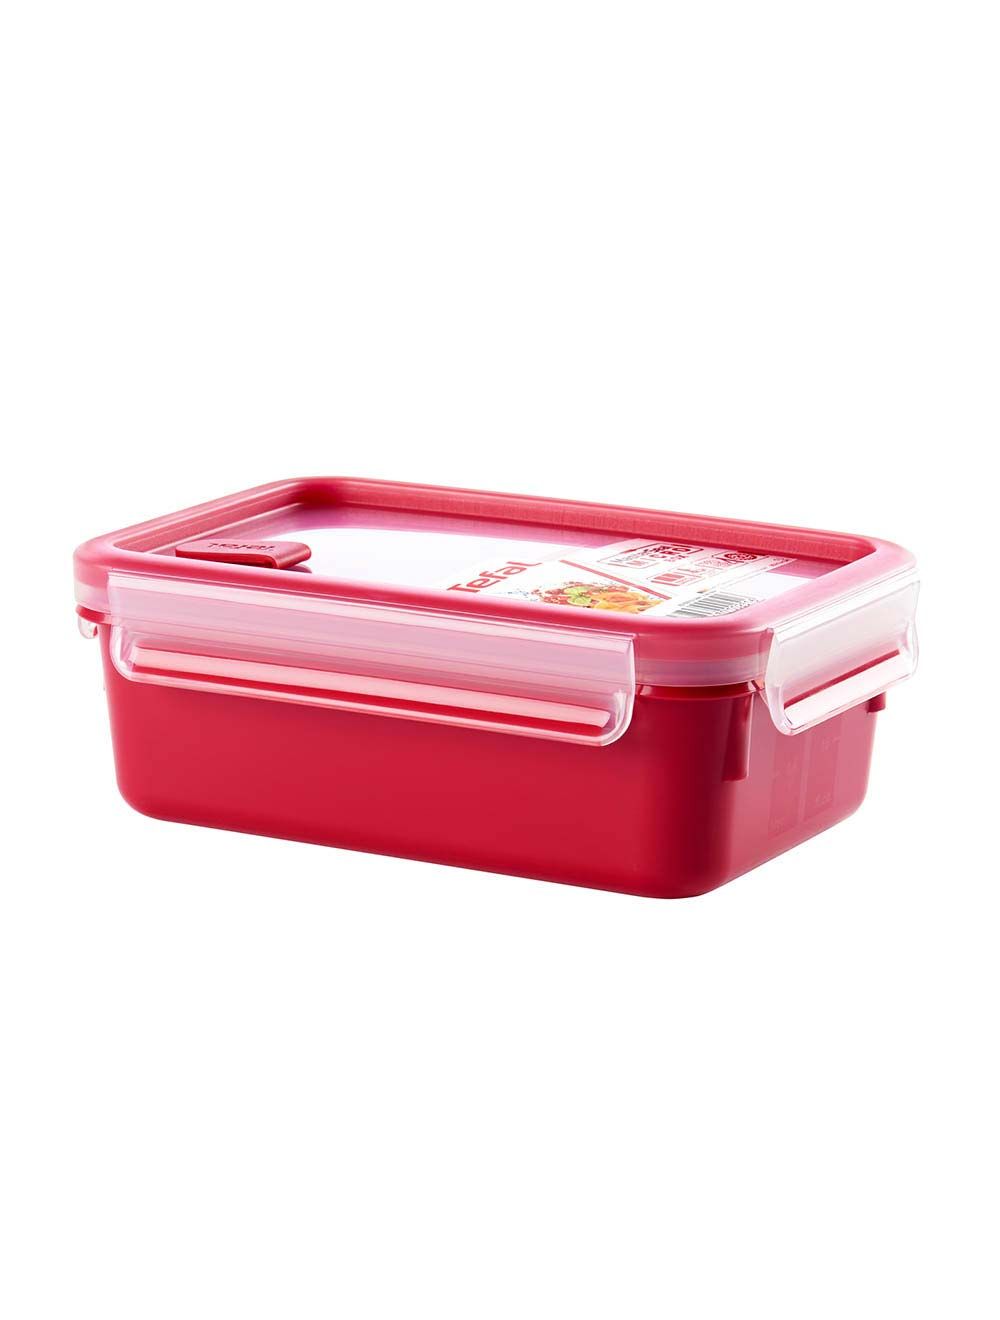 Tefal Masterseal Micro Rectangle Food Container, 1.2 Litres K3102412